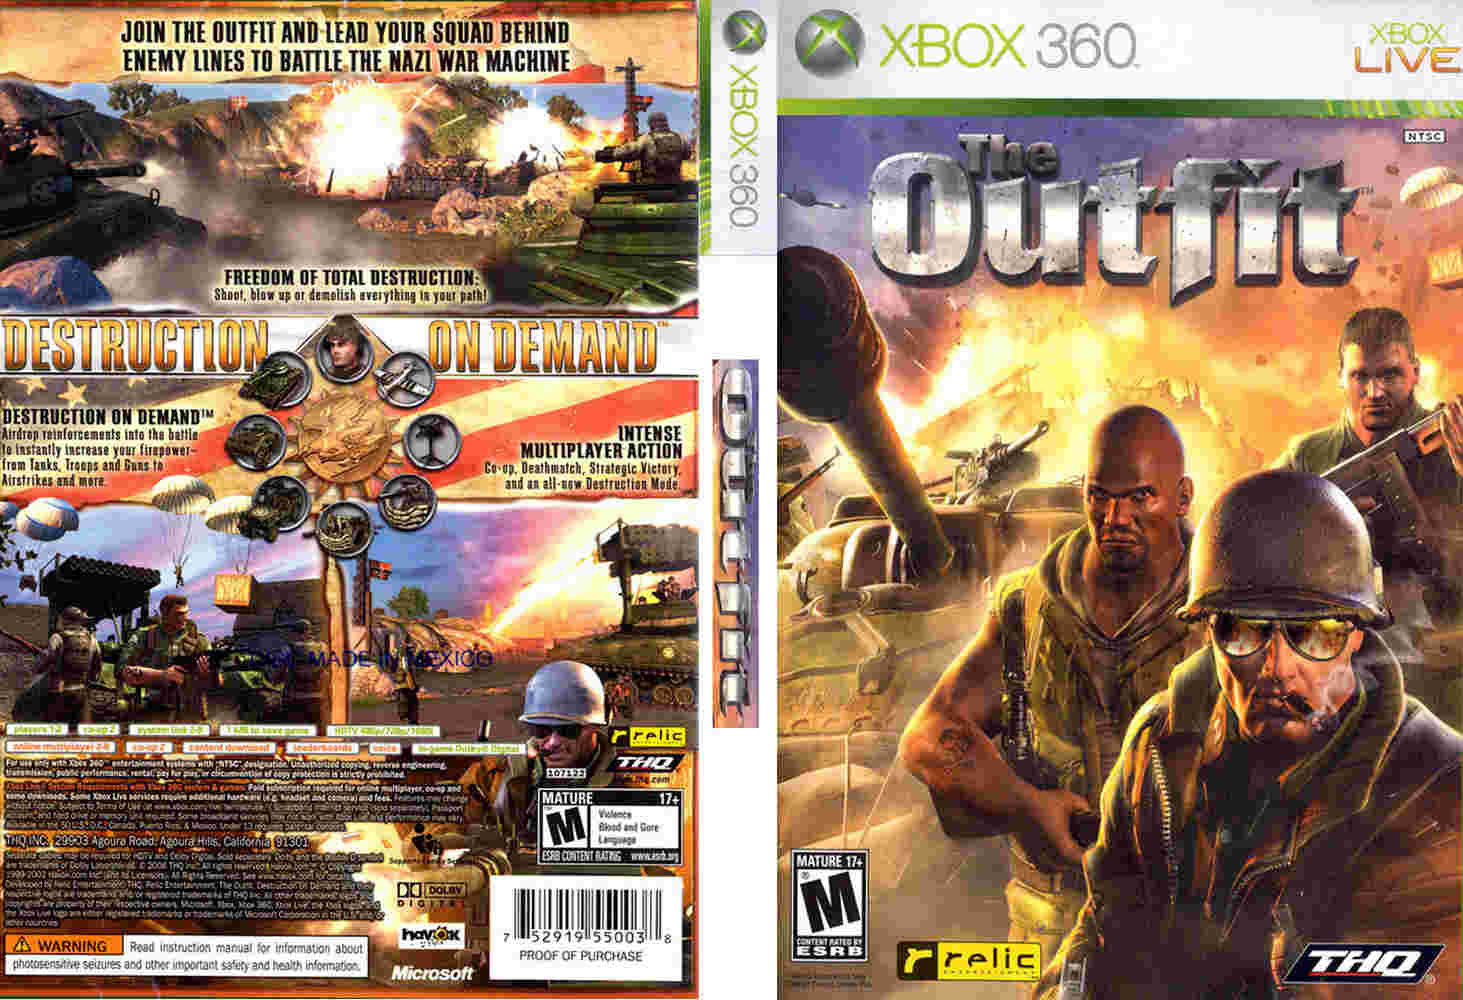 the outfit xbox 360